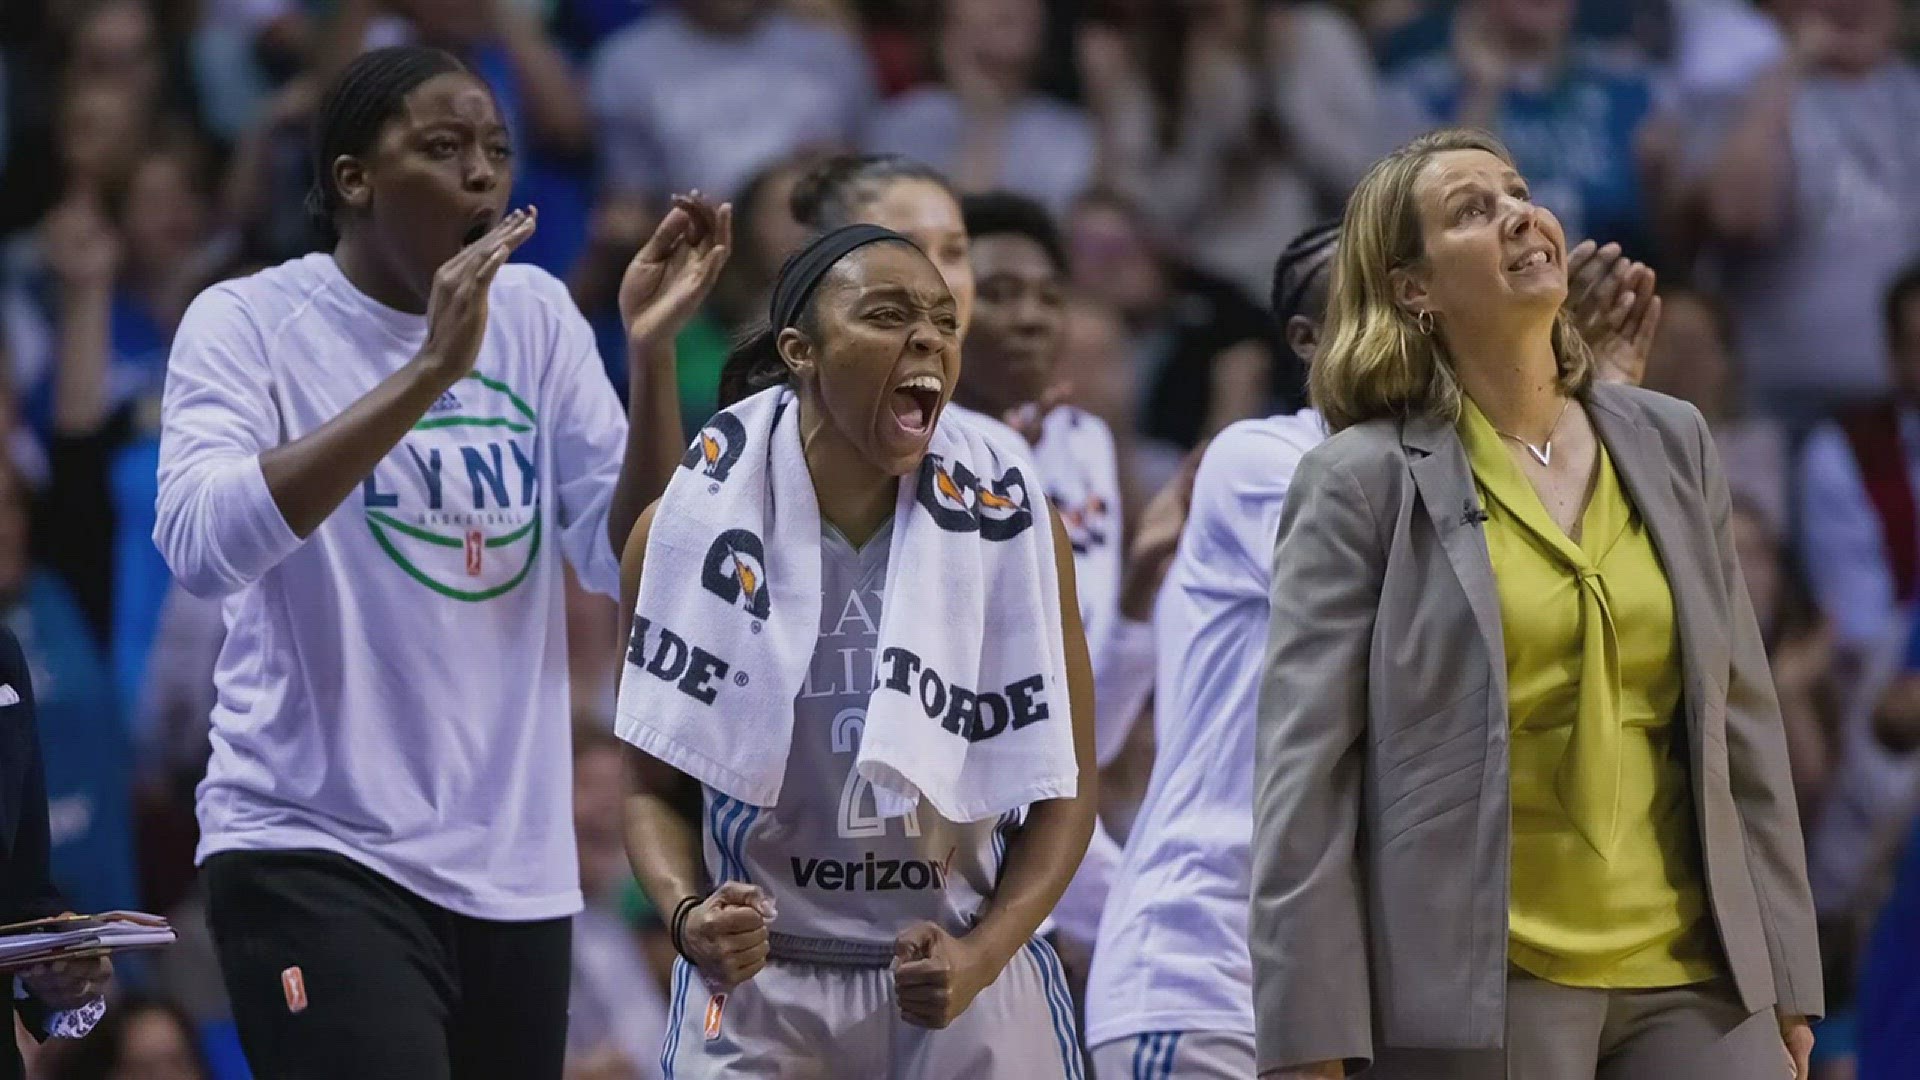 The Minnesota Lynx are celebrating in downtown Minneapolis Thursday night following another WNBA championship, its fourth in seven years. http://kare11.tv/2yL0r79